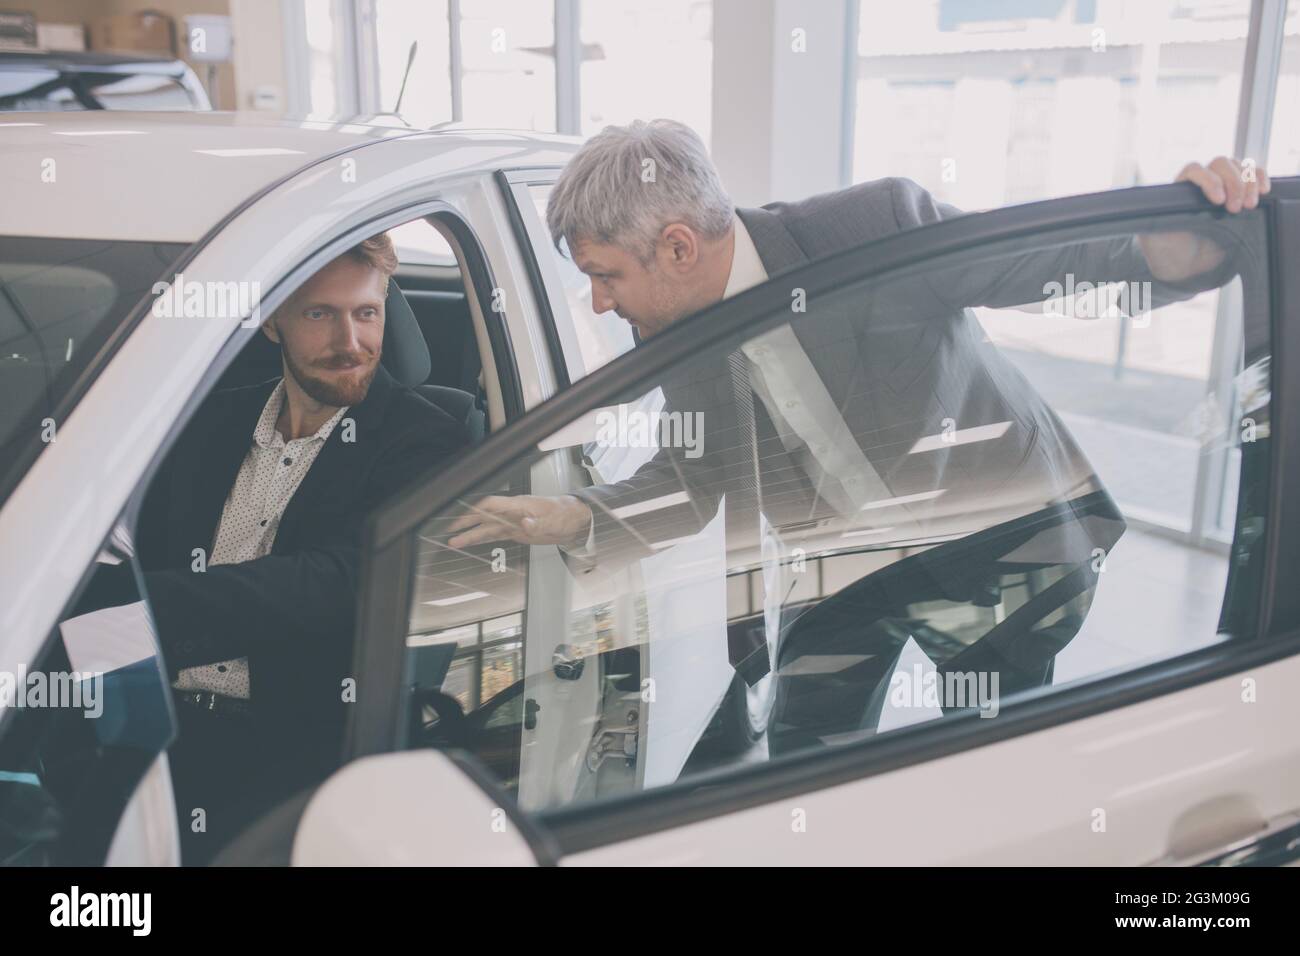 Vehicle dealer showing new car to young handsome man. Stock Photo